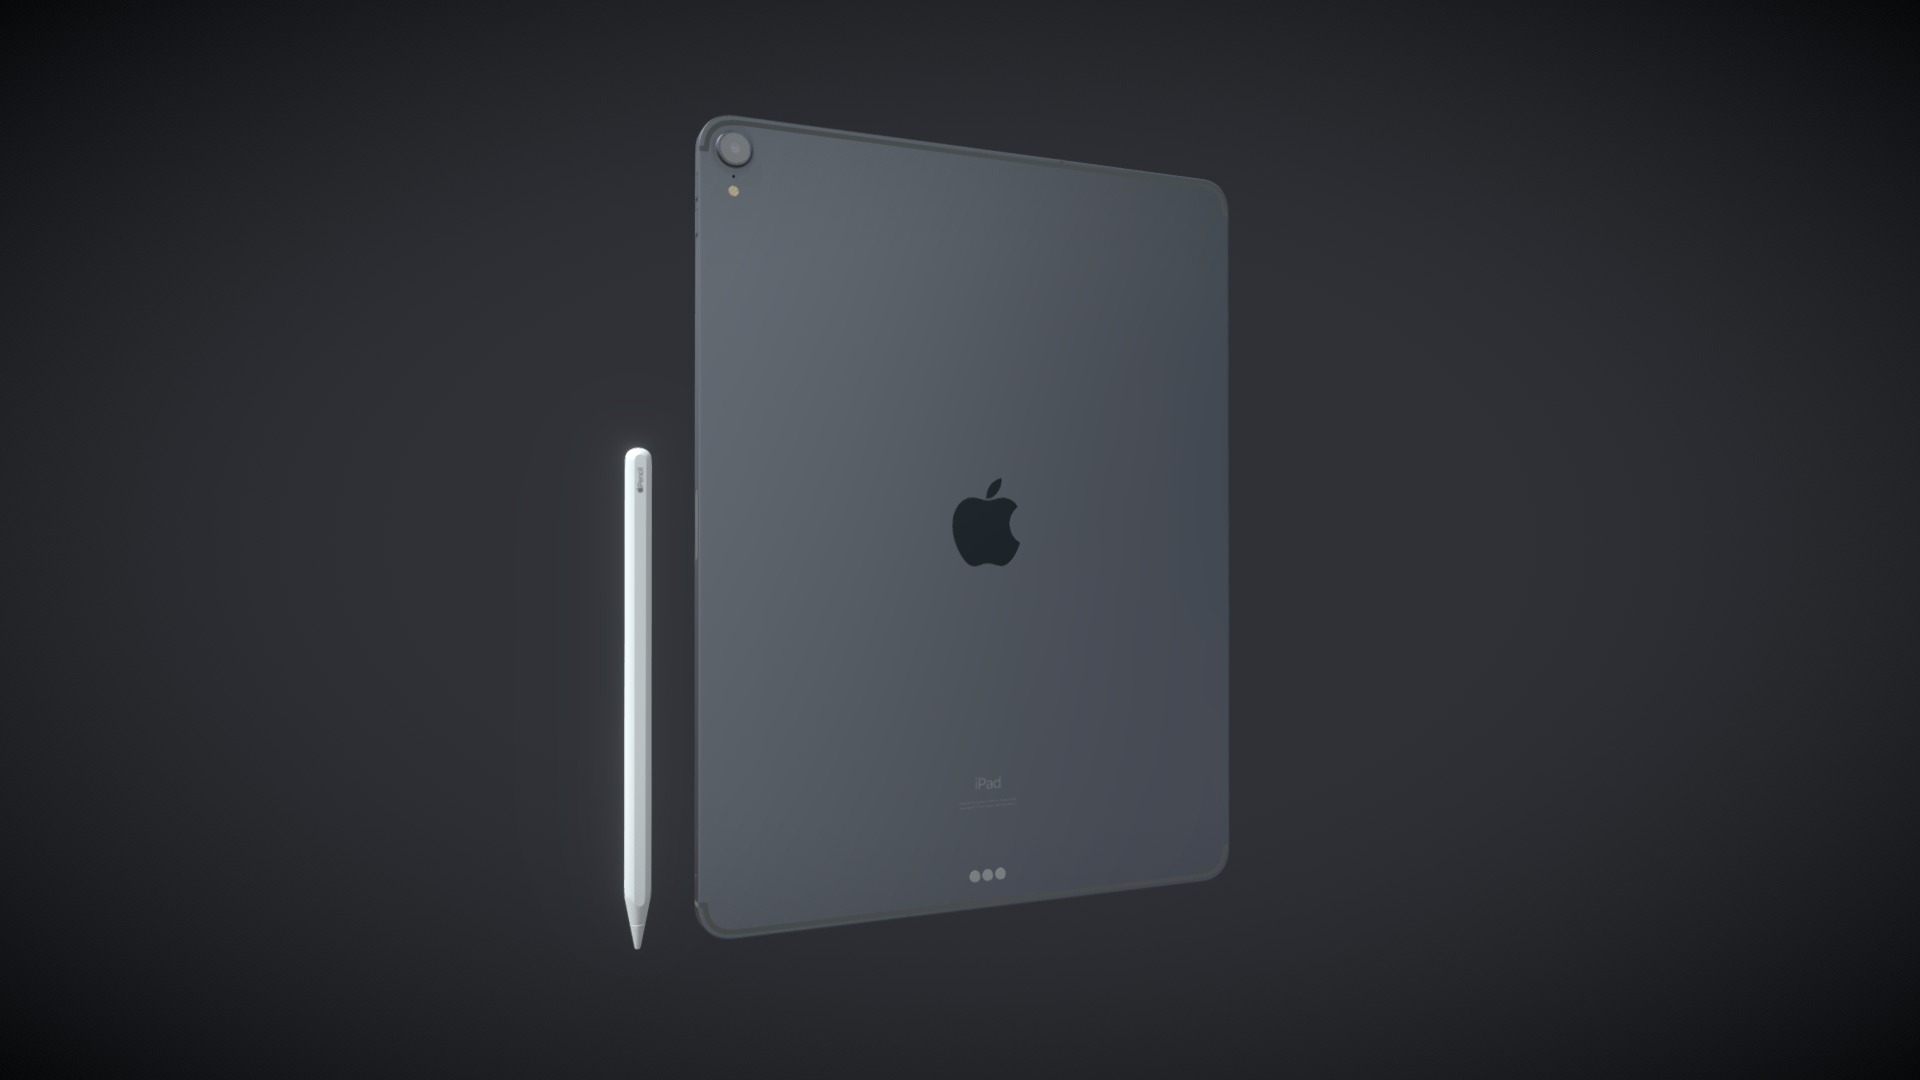 Realistic (copy) 3d model of Apple iPad Pro 12.9 inch Wi-Fi + Cellular 2018 and New Apple Pencil.




iPad Pro 12.9 inch Silver Wi-Fi + Cellular

iPad Pro 12.9 inch Space Gray Wi-Fi + Cellular

New Apple Pencil

This set:
3D element v2.2
The model given is easy to use
- 1 file obj standard
- 1 file 3ds Max 2013 vray material 
- 1 file 3ds Max 2013 corona material
- 1 file of 3Ds
- 1 file e3d full set of materials

Topology of geometry:




forms and proportions of The 3D model

the geometry of the model was created very neatly

there are no many-sided polygons

detailed enough for close-up renders

the model optimized for turbosmooth modifier

Not collapsed the turbosmooth modified

apply the Smooth modifier with a parameter to get the desired level of detail

Organization of scene:




to all objects and materials

real world size (system units - mm)

coordinates of location of the model in space (x0, y0, z0)

does not contain extraneous or hidden objects (lights, cameras, shapes etc.)
 - Apple iPad Pro 12-9 inch Wi-Fi and Cellular 2018 - Buy Royalty Free 3D model by madMIX 3d model